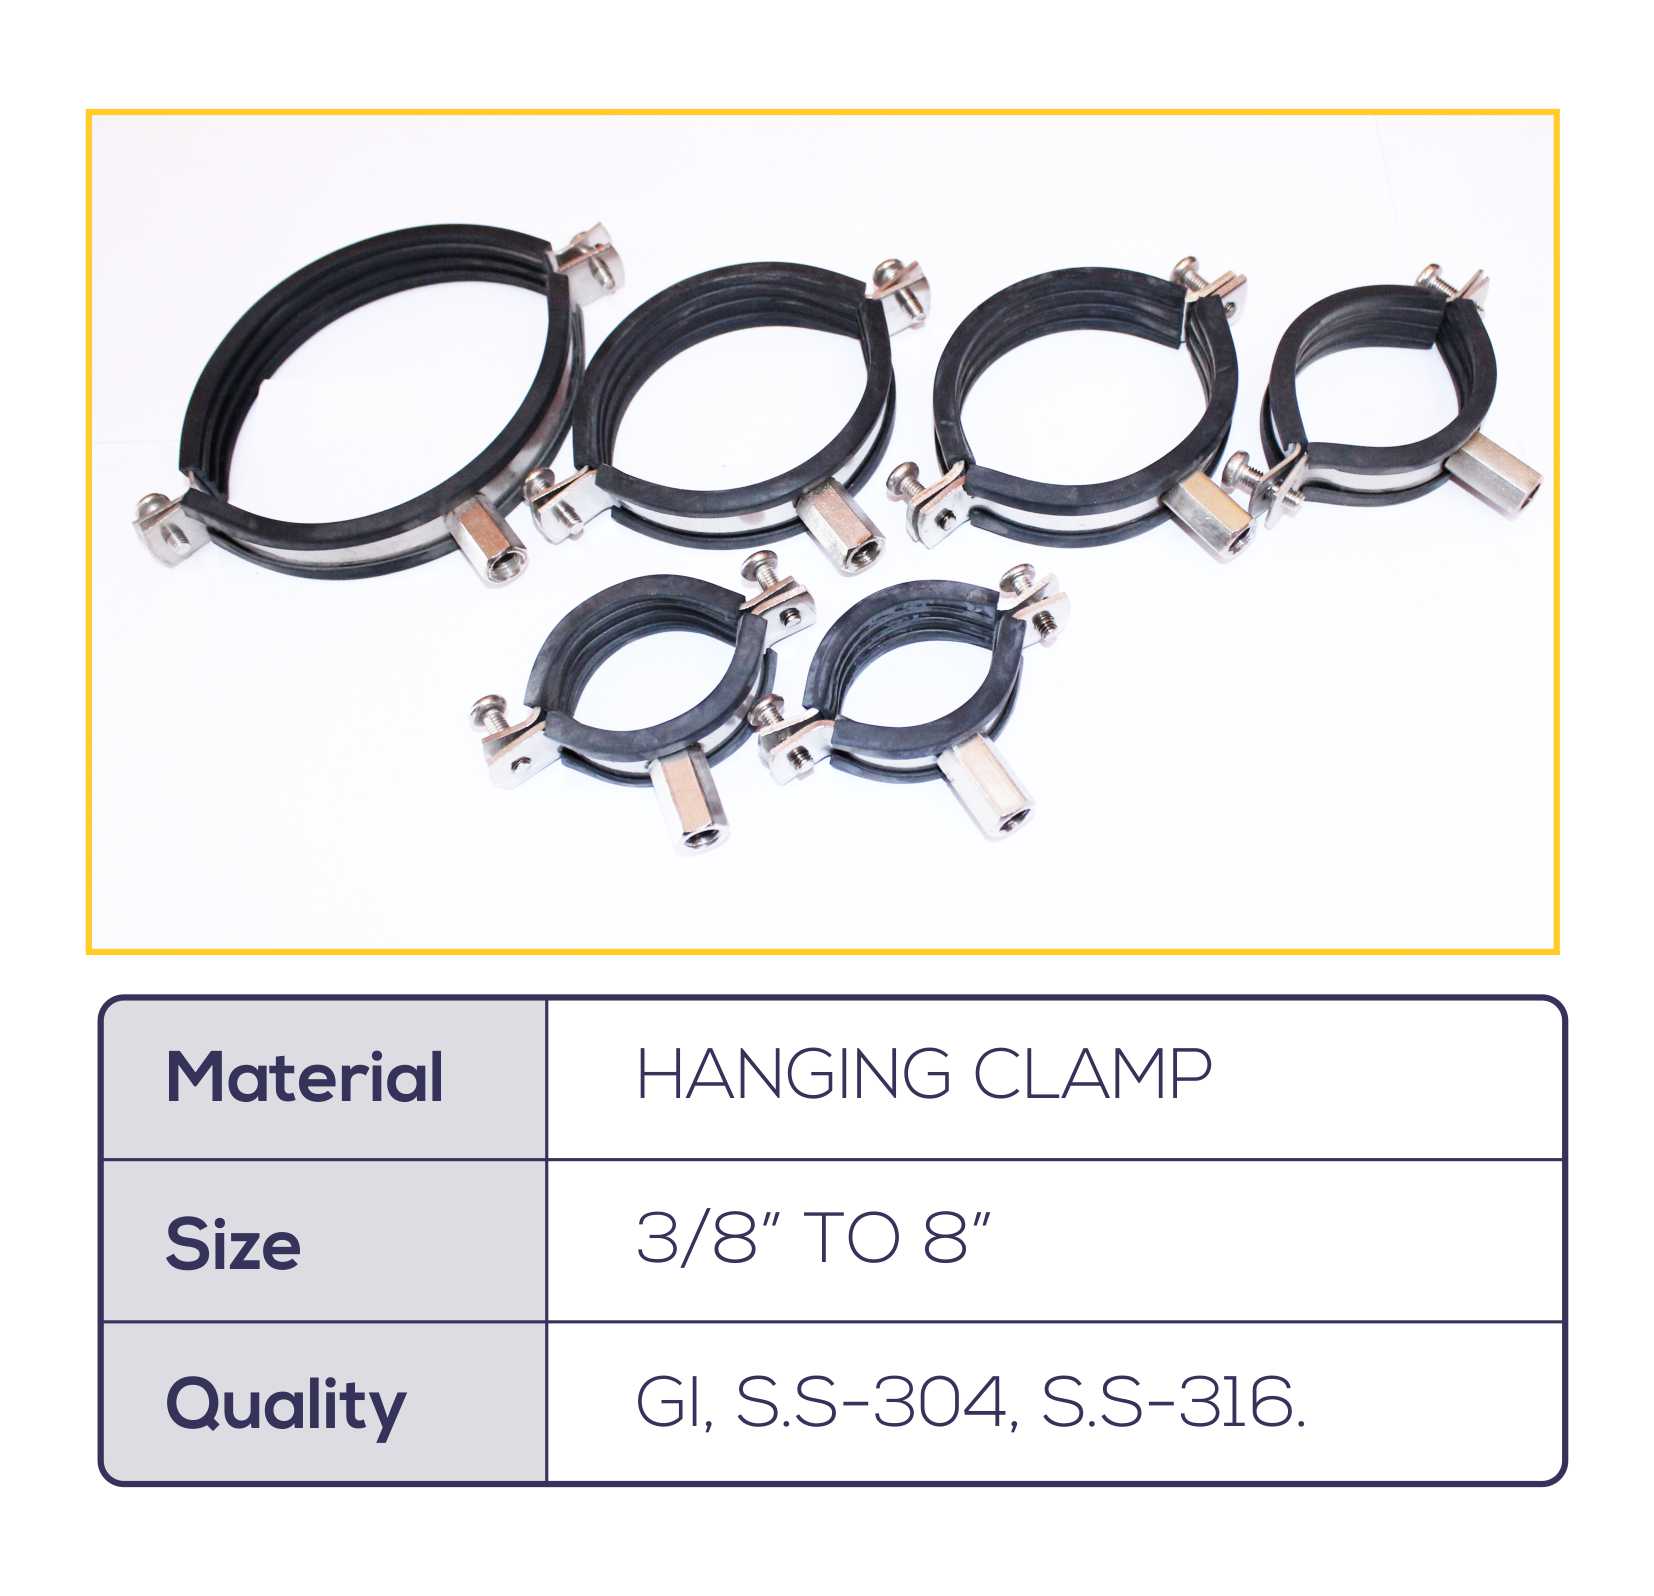 HANGING CLAMP